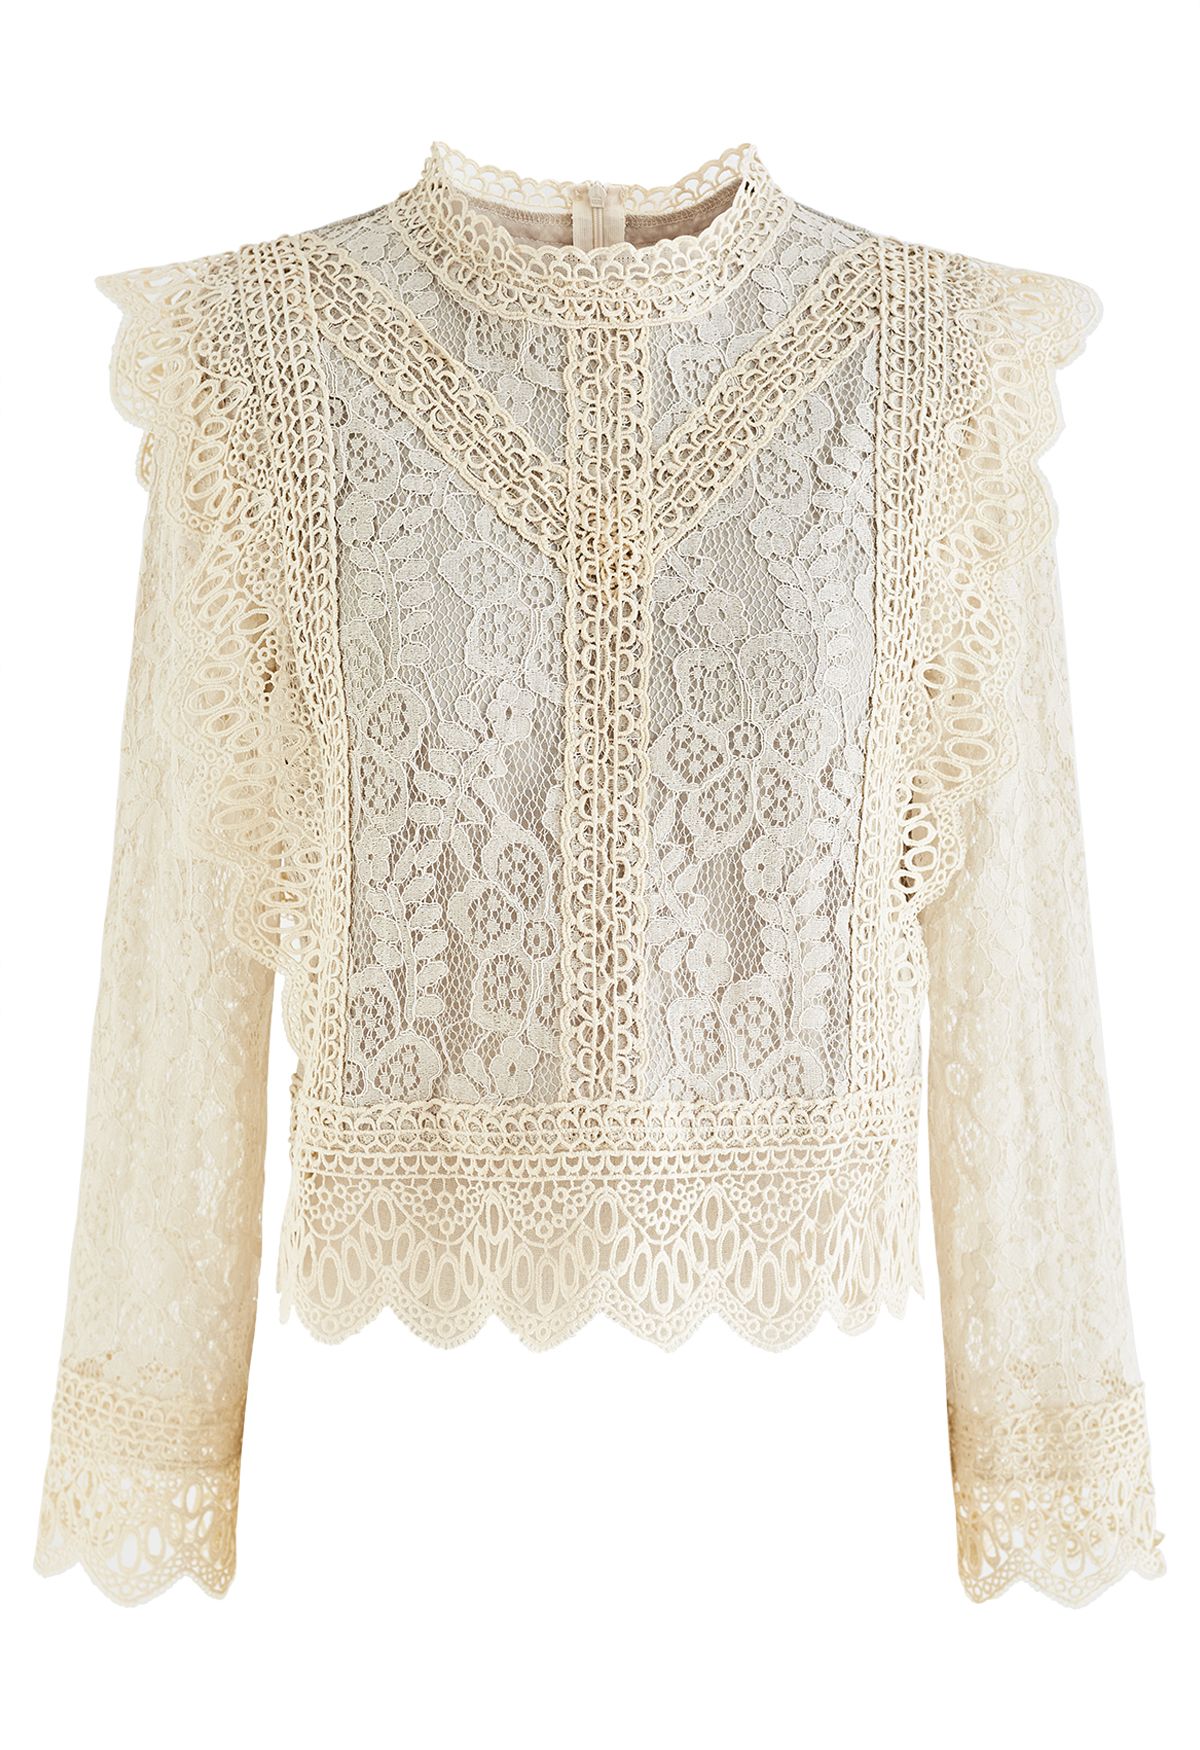 Your Sassy Start Long Sleeve Crochet Lace Top in Cream - Retro, Indie and  Unique Fashion